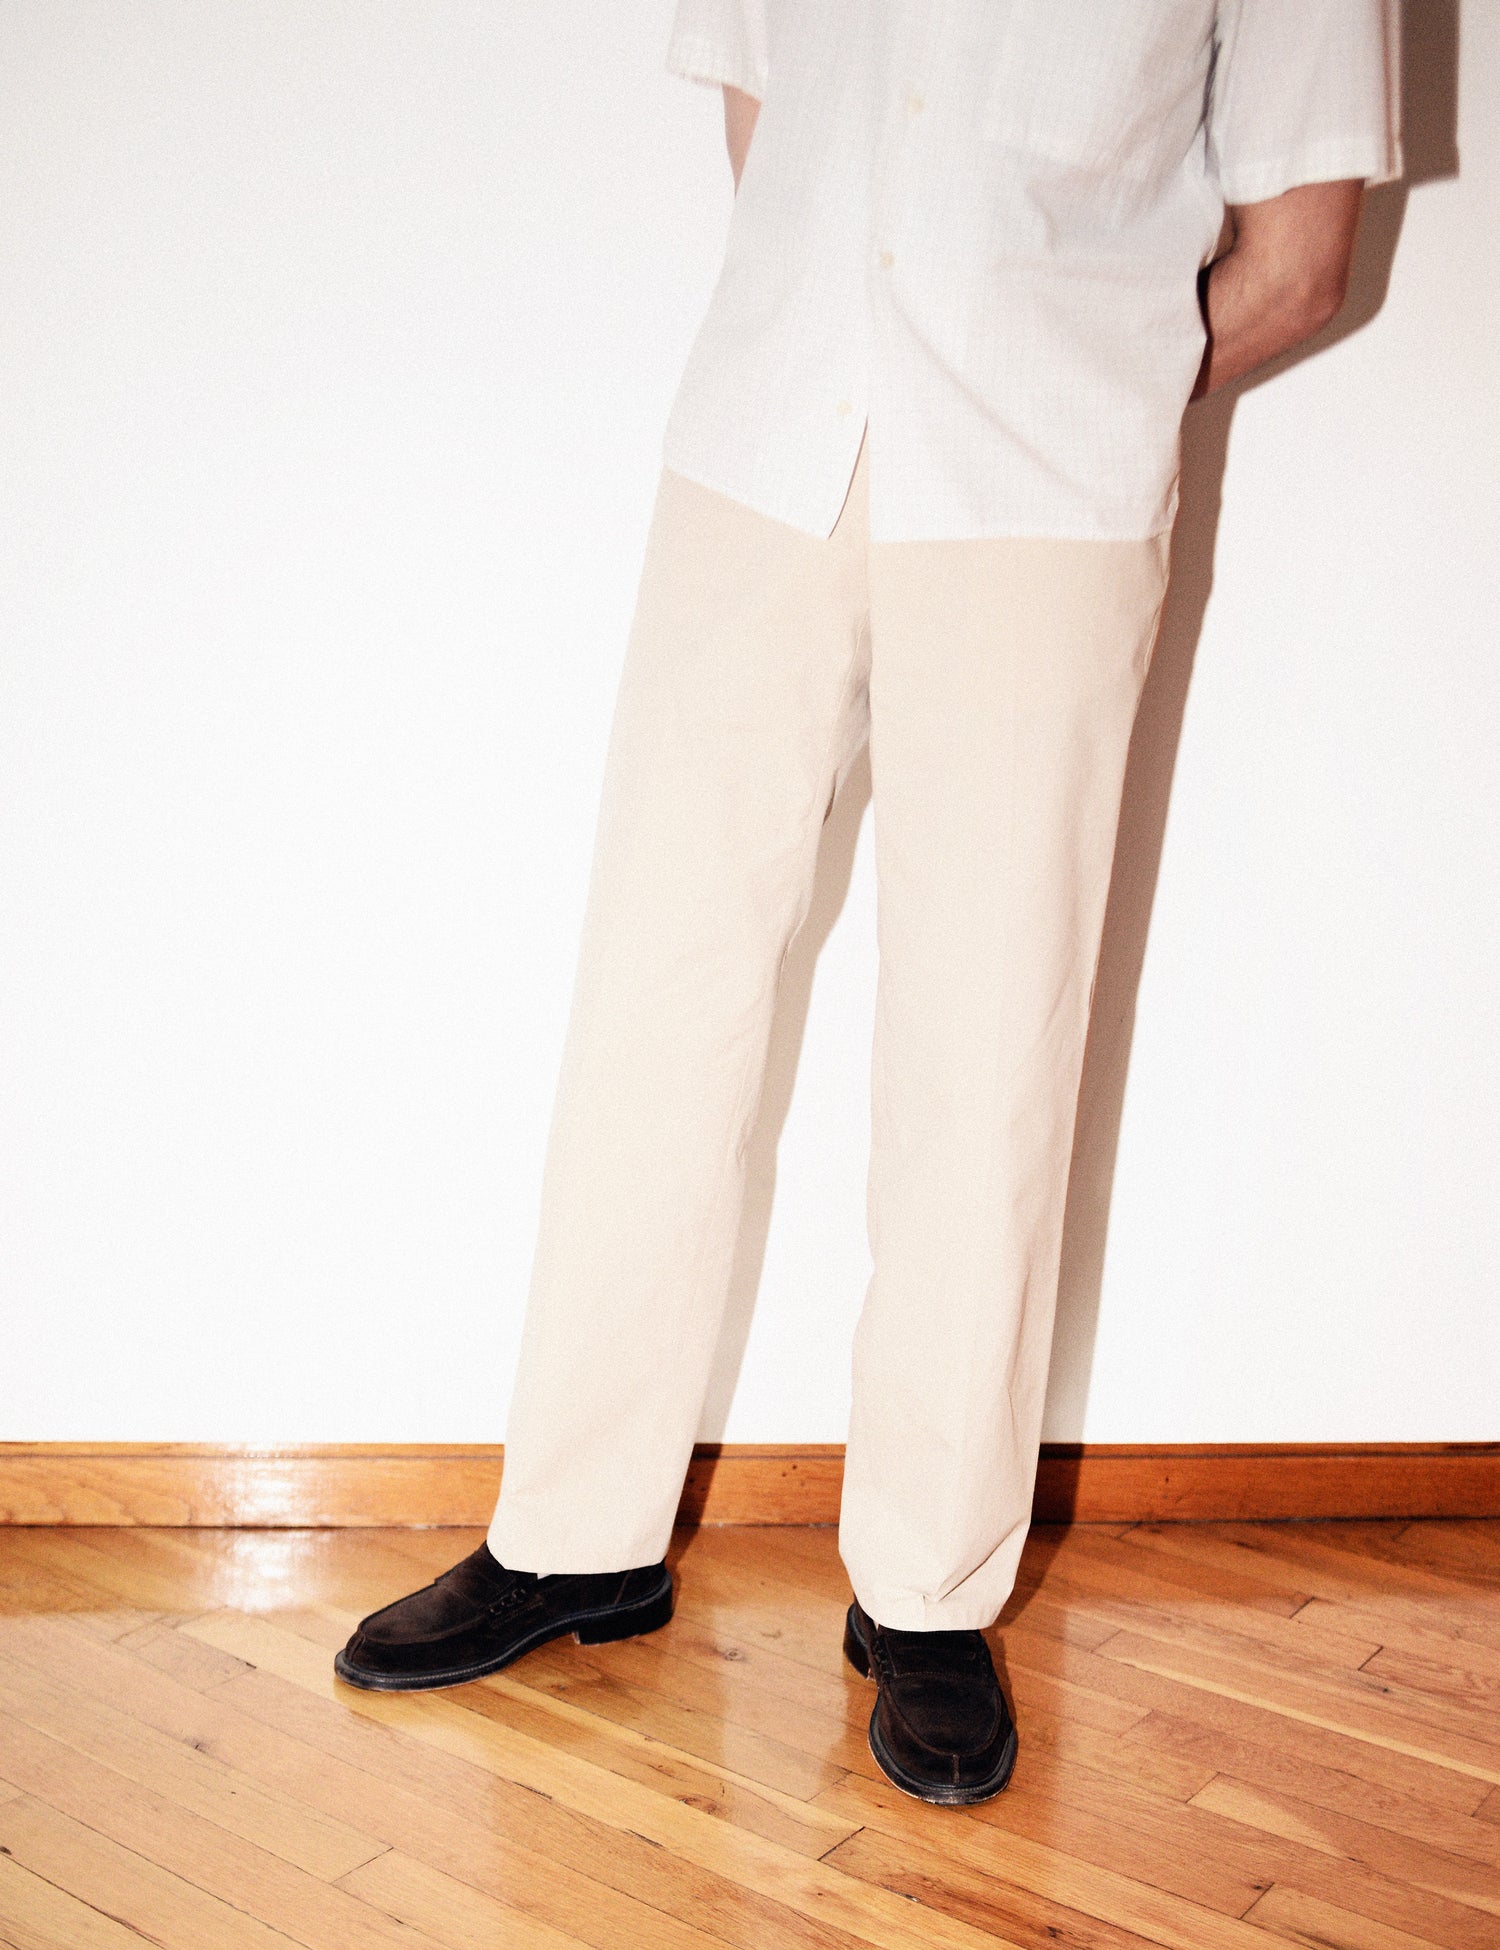 Main Homepage Image 2 of 2, featuring our Cotton / Silk BKT36 Pant in Desert Sand, and our BKT18 Camp Shirt in Cotton Silk Graph Check - Natural 